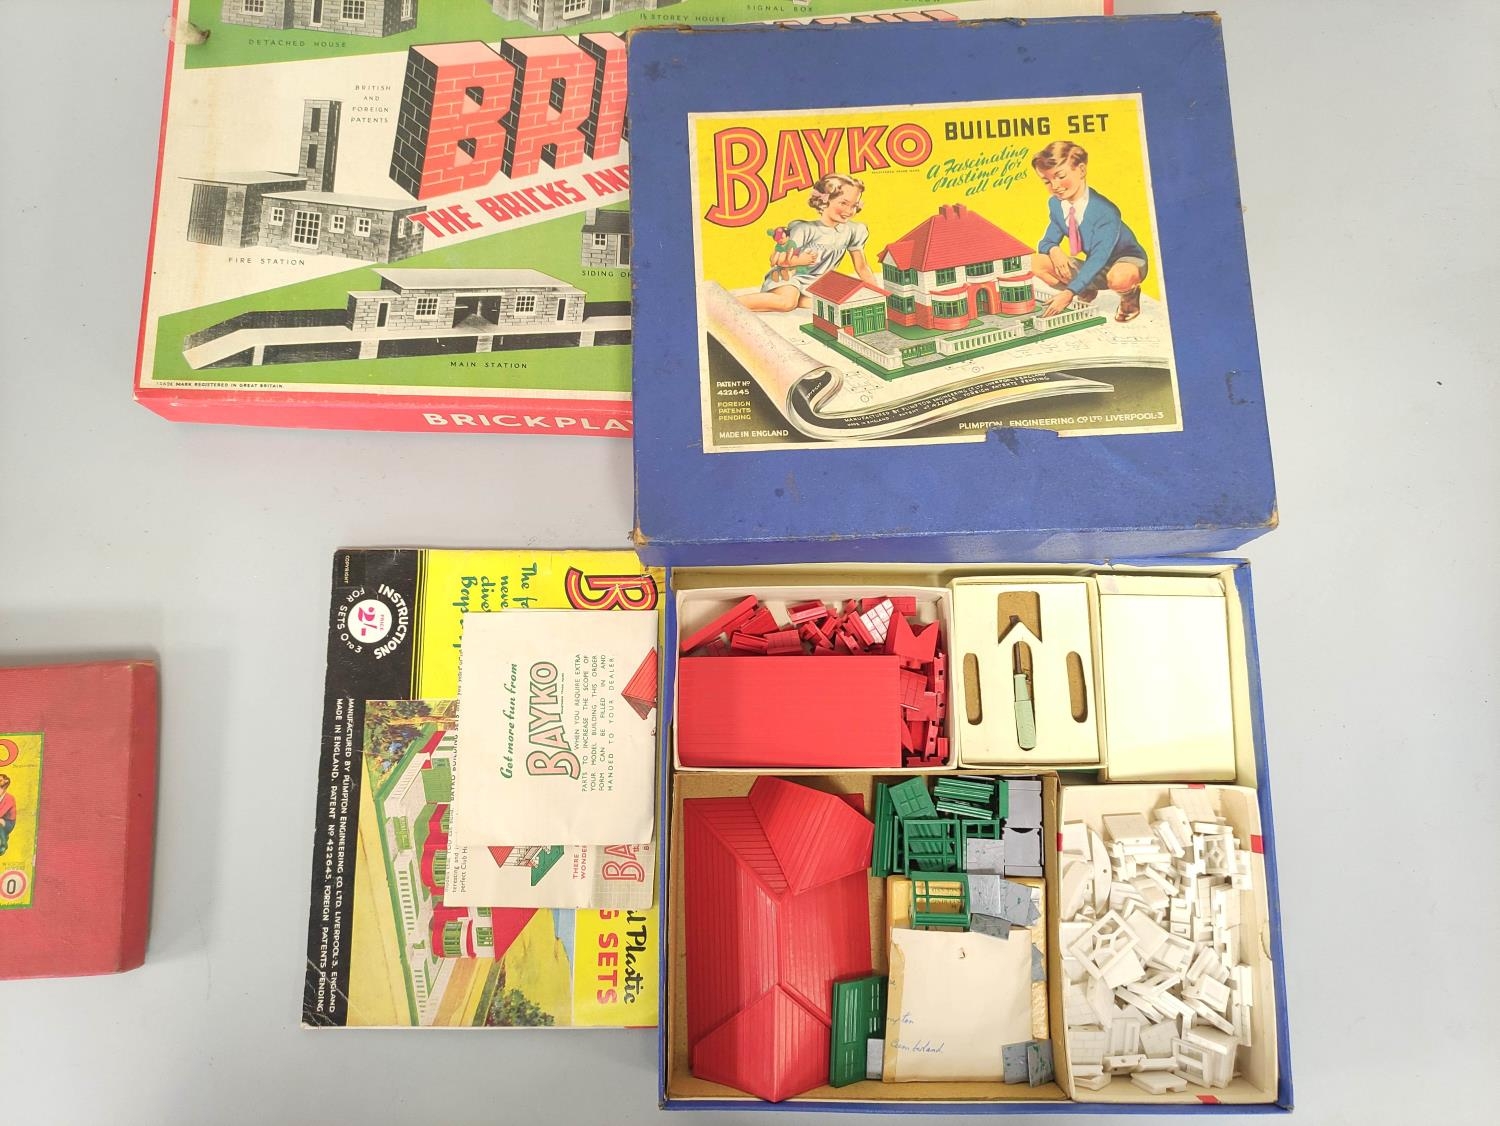 Vintage boxed construction sets to include Brickplayer Kit 4, Bayko Building Set, and Meccano outfit - Image 4 of 6